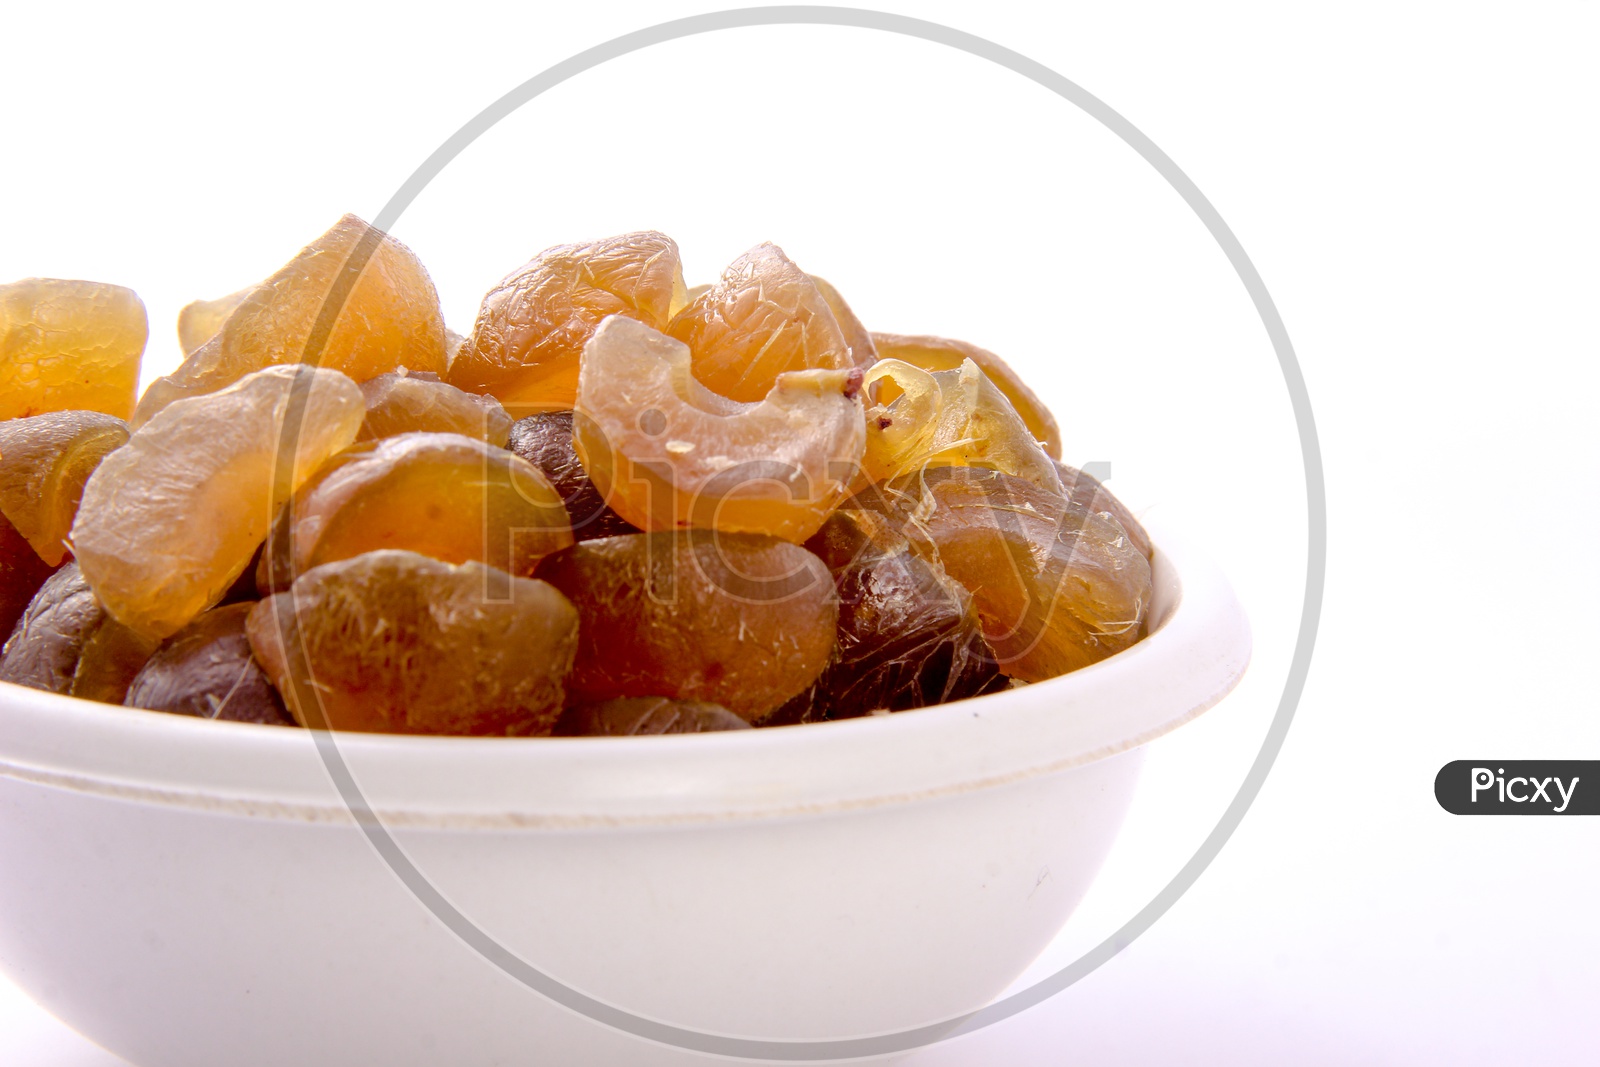 Dry Gooseberry in a Bowl on an Isolated White Background